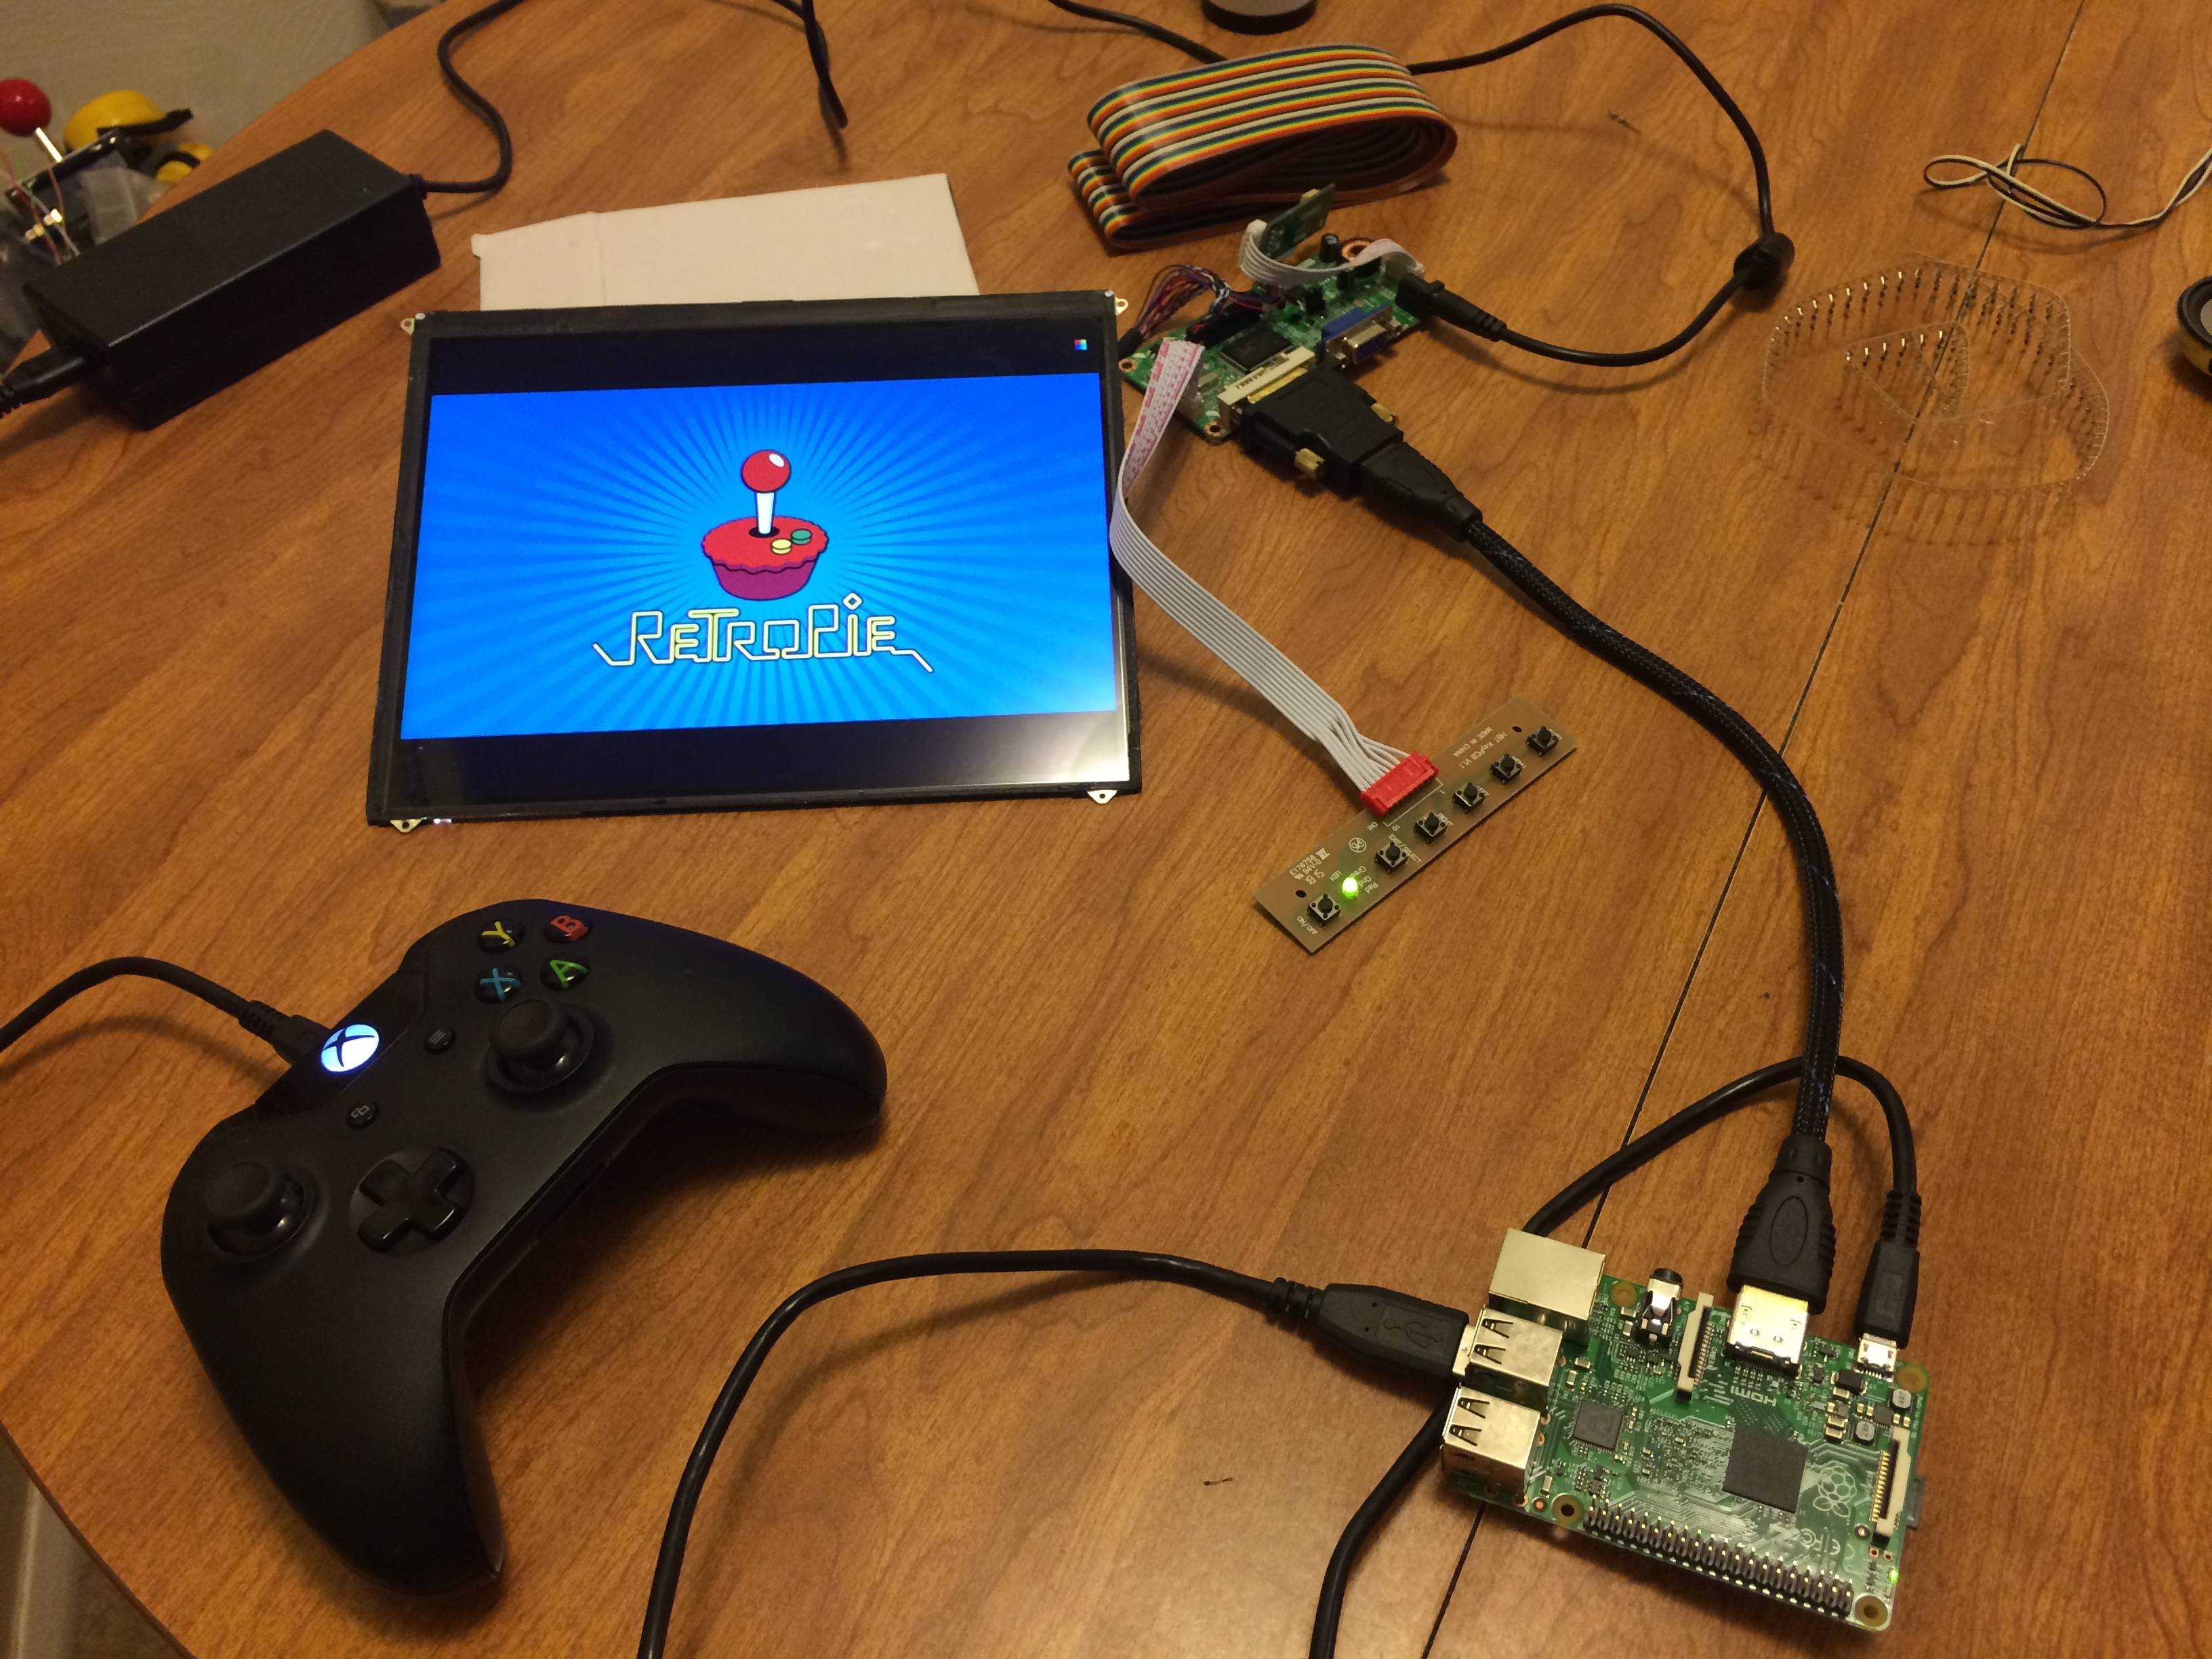 Got my new quad core raspberry pi in and had to test it out! Just wanted to poke around in RetroPie.